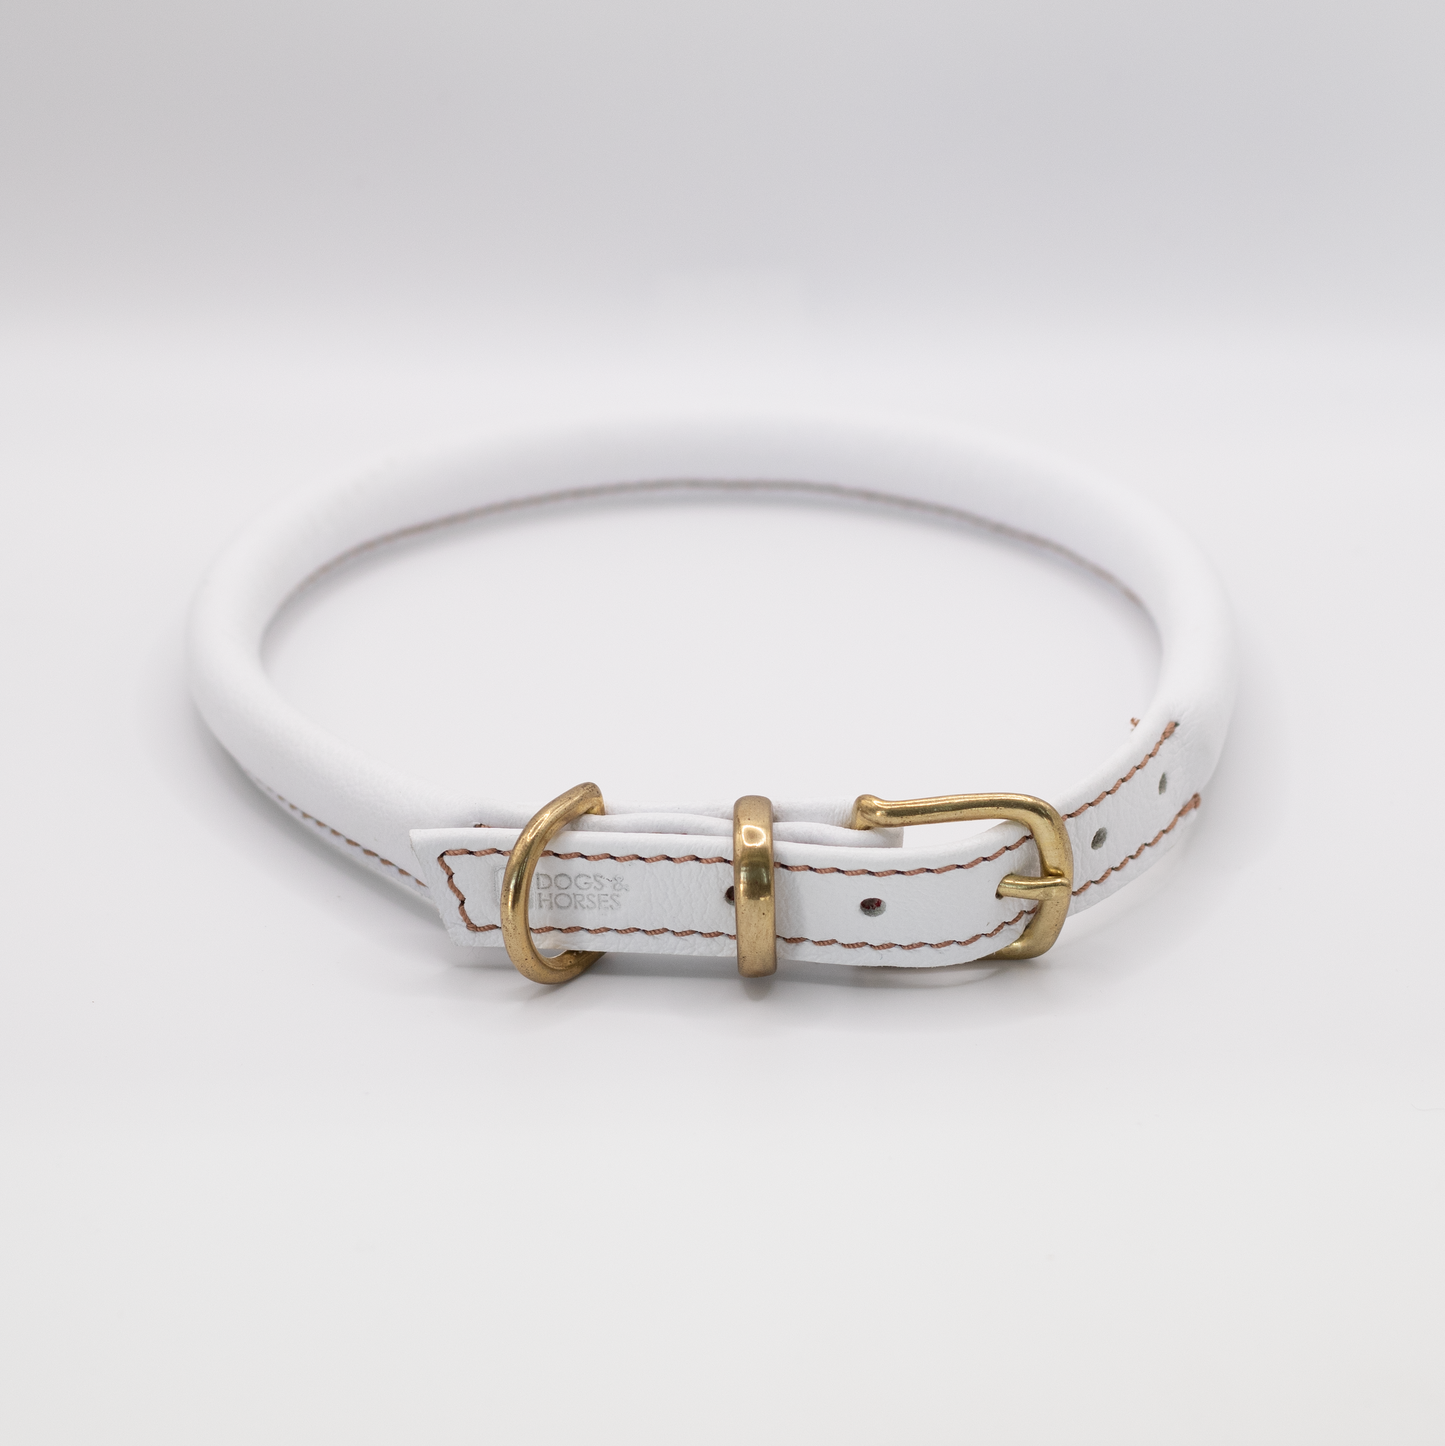 Rolled Soft Leather Dog Collar White